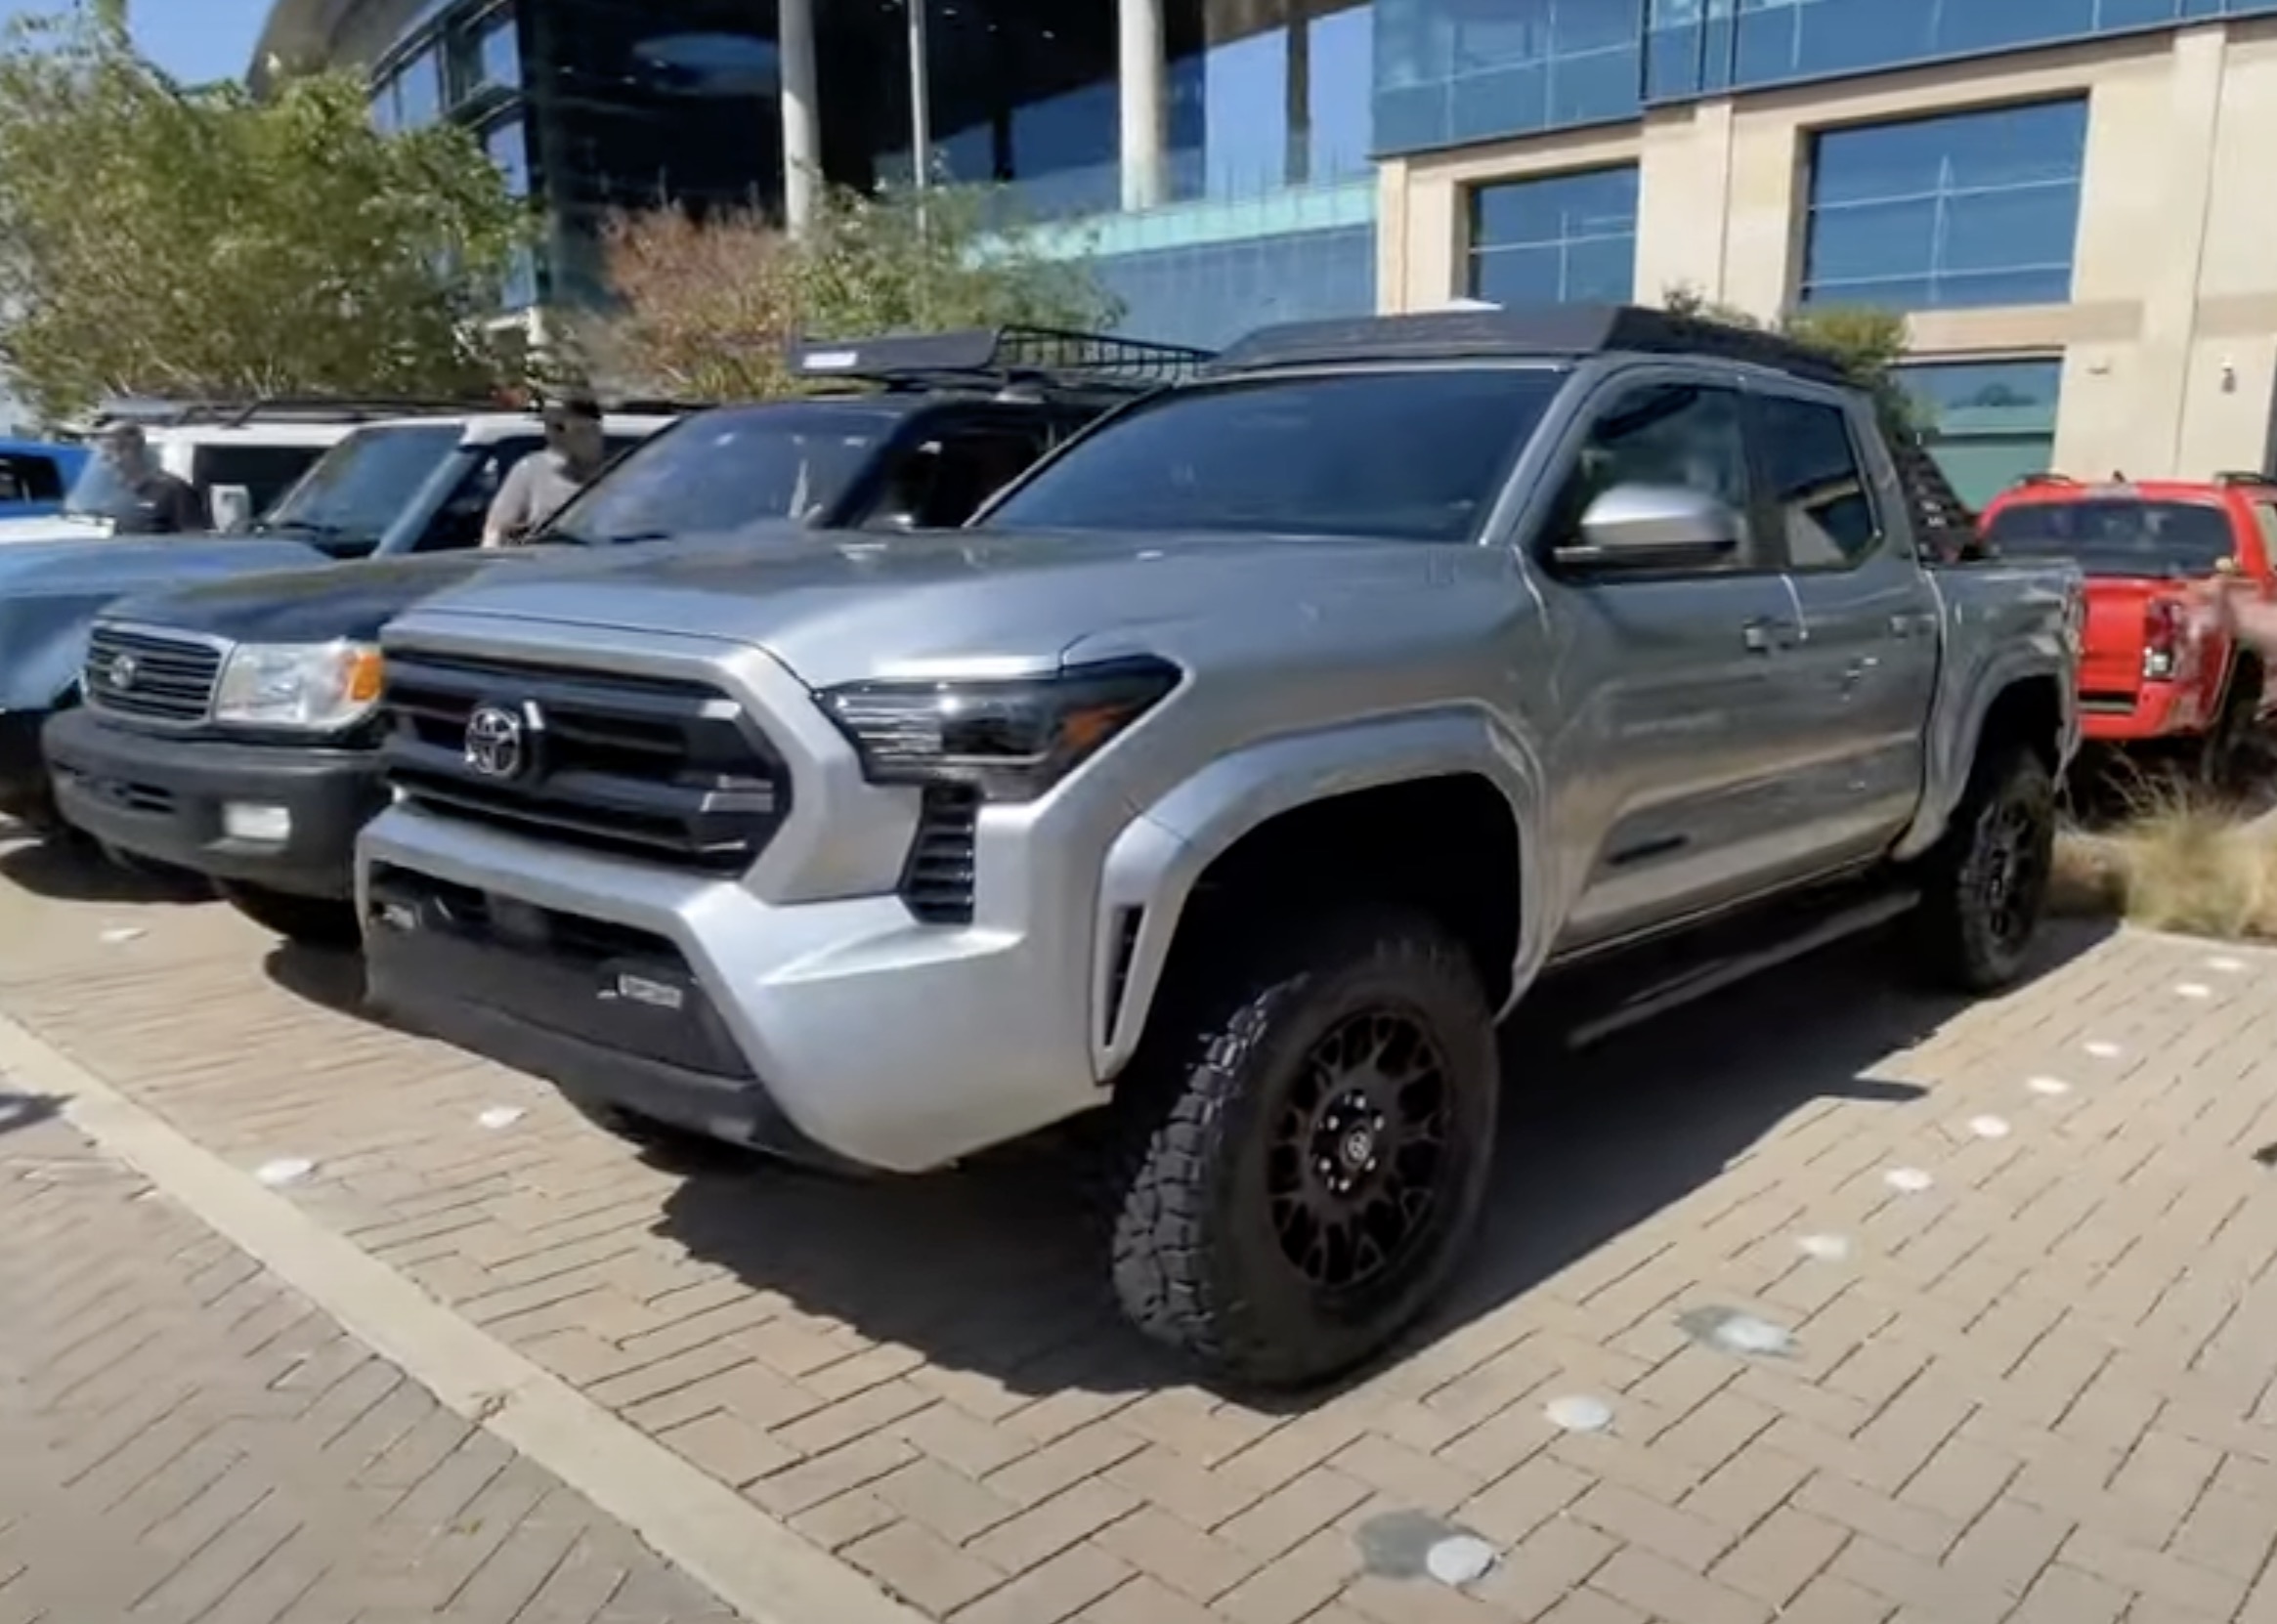 2024 Tacoma 2024 Tacoma SR5 - Specs, Price, MPG, Options/Packages, Features & Photos Celestial Silver 2024 Tacom SR5 TRD Lift Kit 2.5 2.0 inches springs struts 3